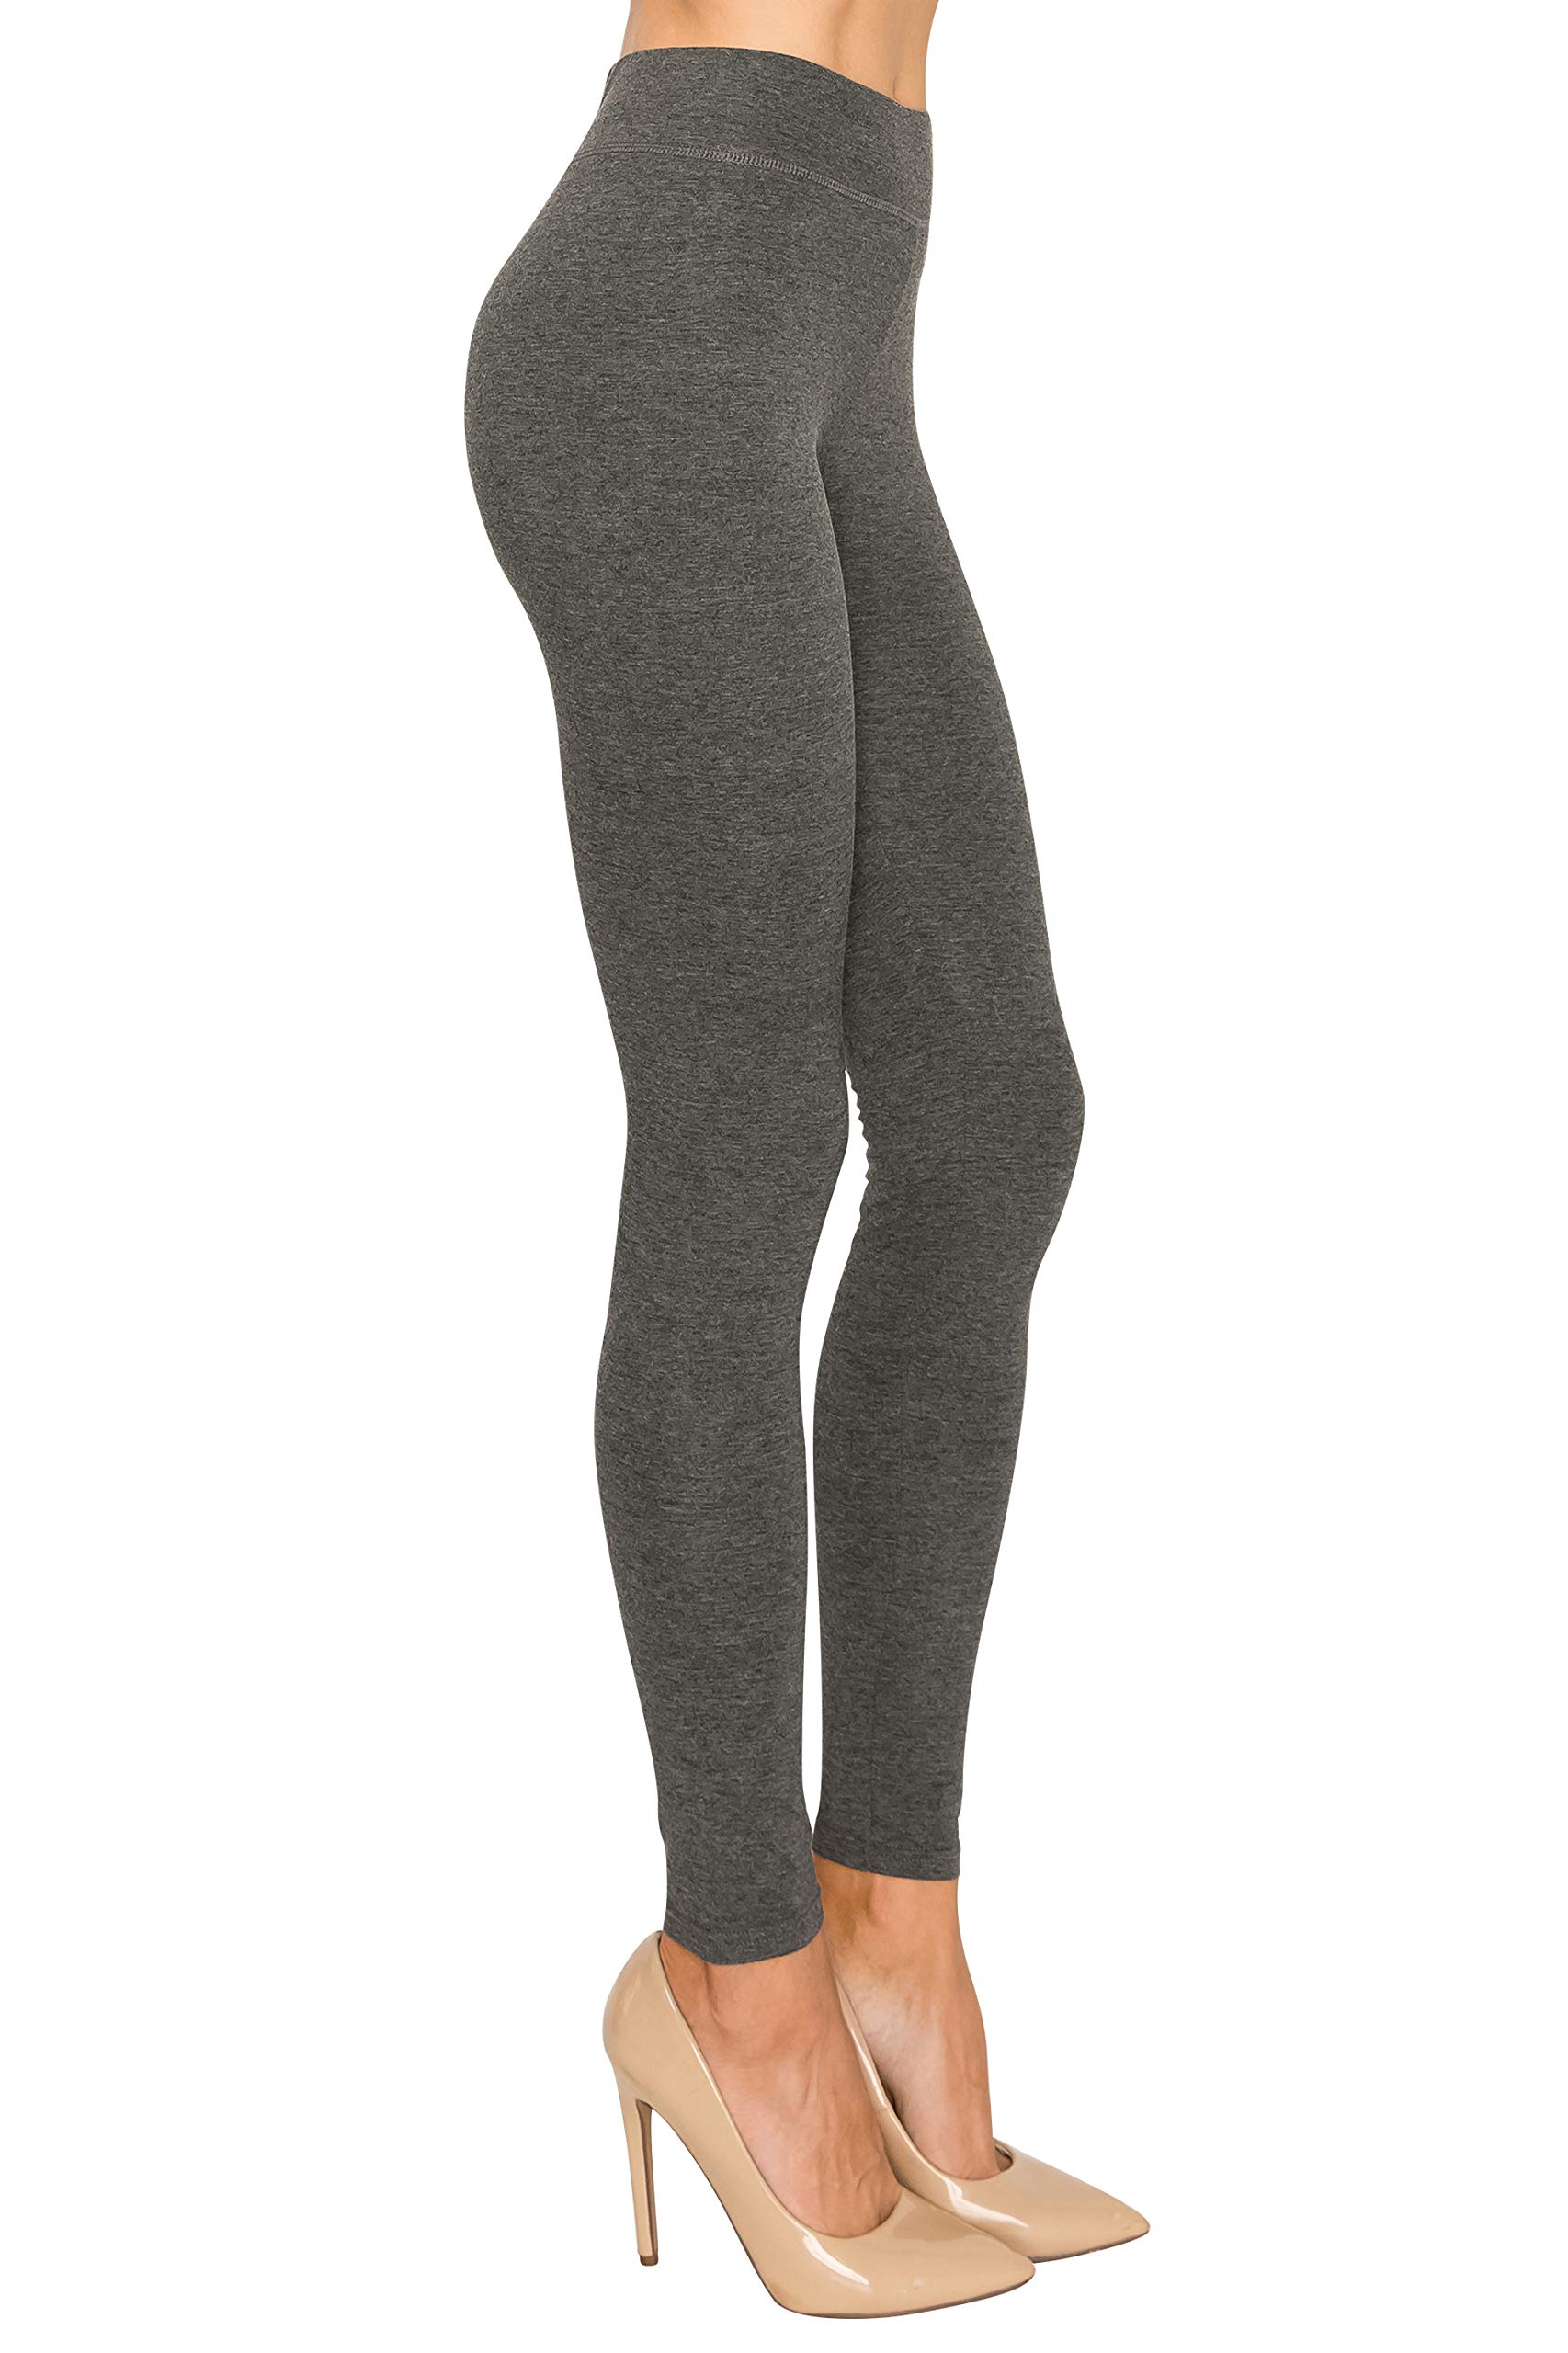 Ettellut Cotton Spandex Basic Knit Jersey Regular And Plus Size Full Active Life Leggings For Women Charcoal M